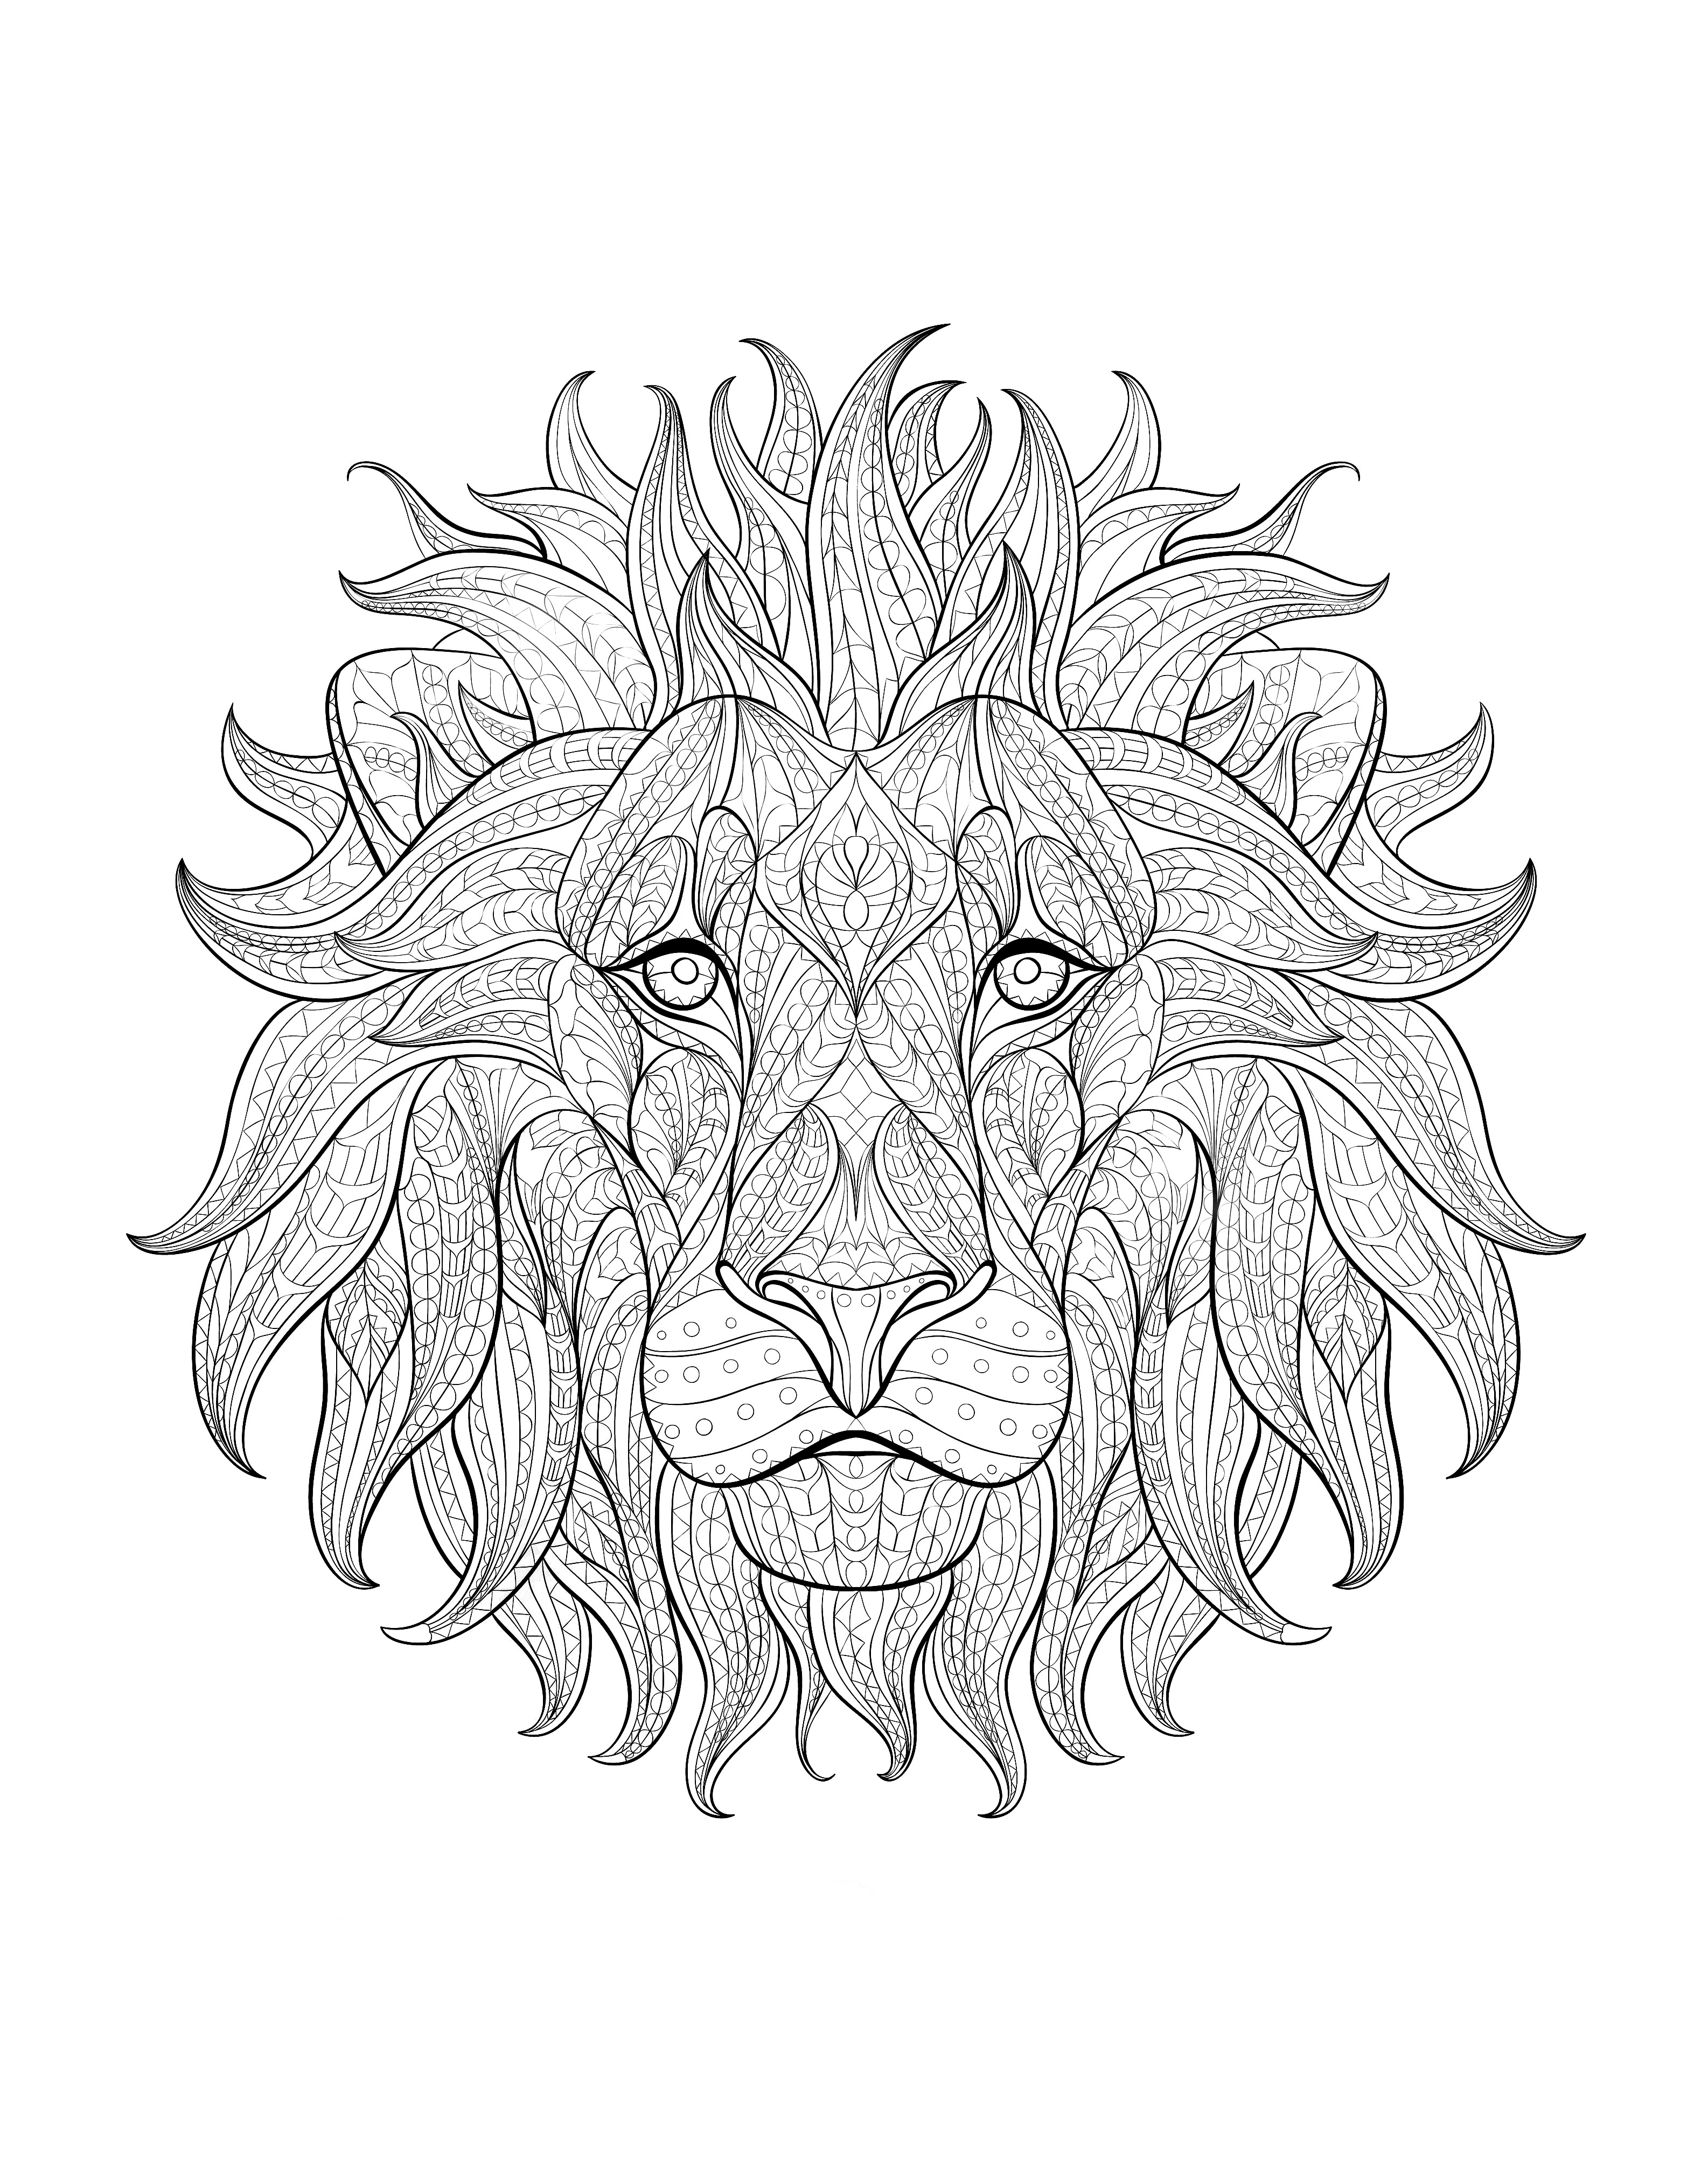 Africa lion head 3 - Africa Adult Coloring Pages - Page 2/